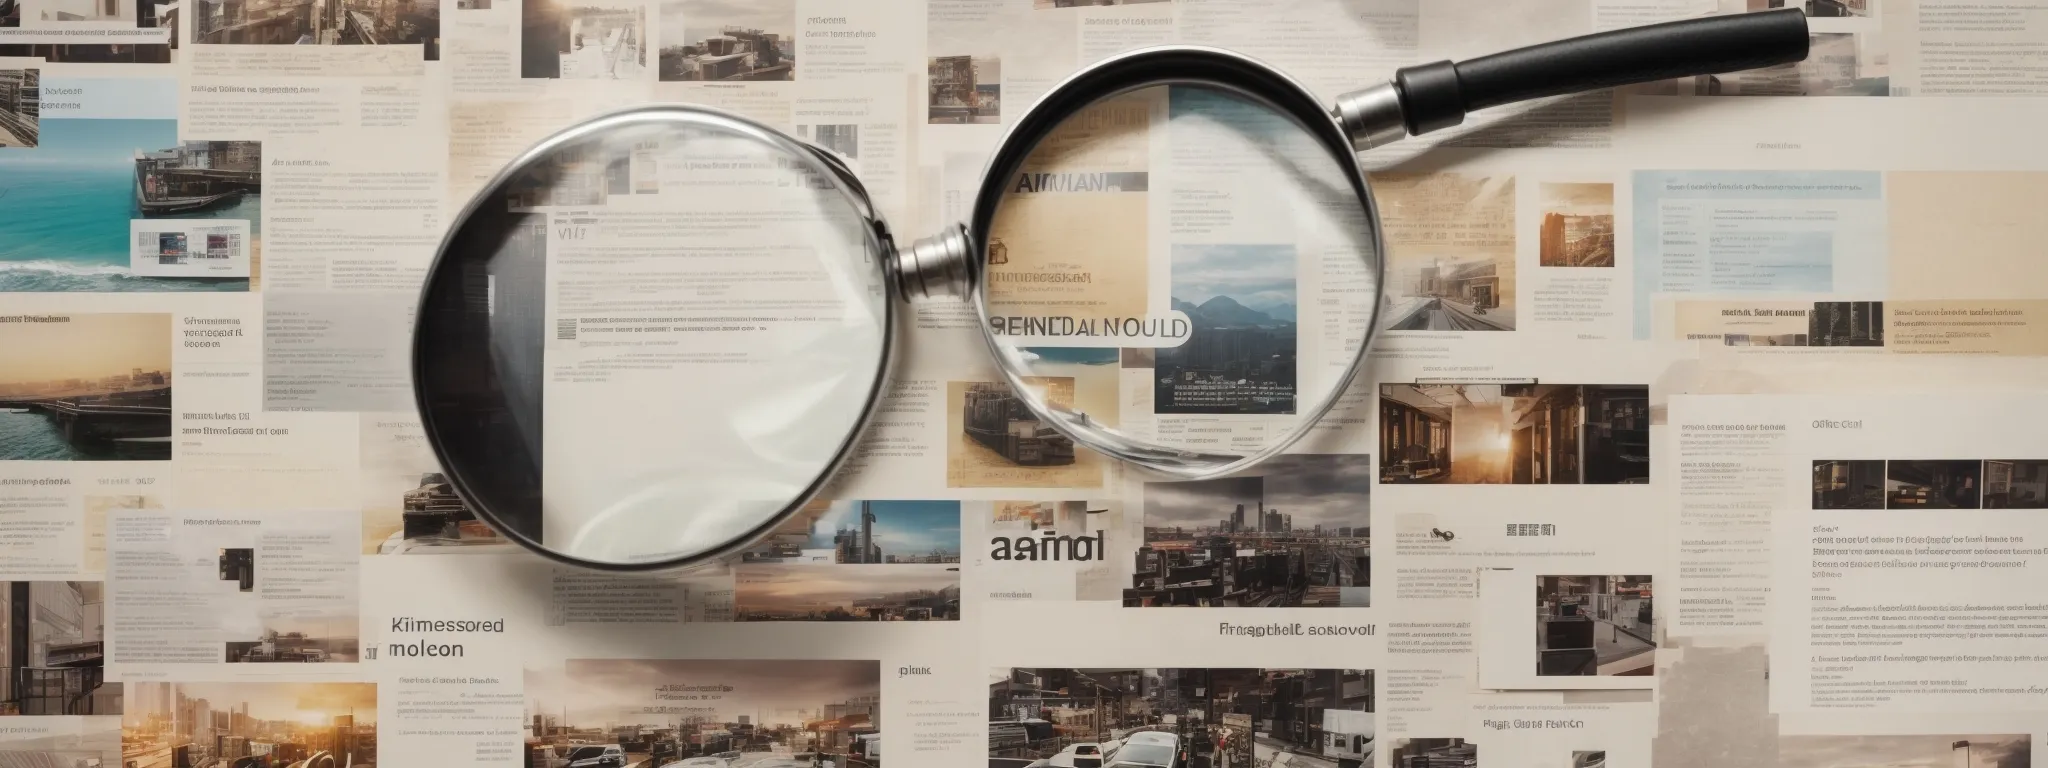 a collage of amazon product search results highlighted with a magnifying glass focusing on specific keywords.